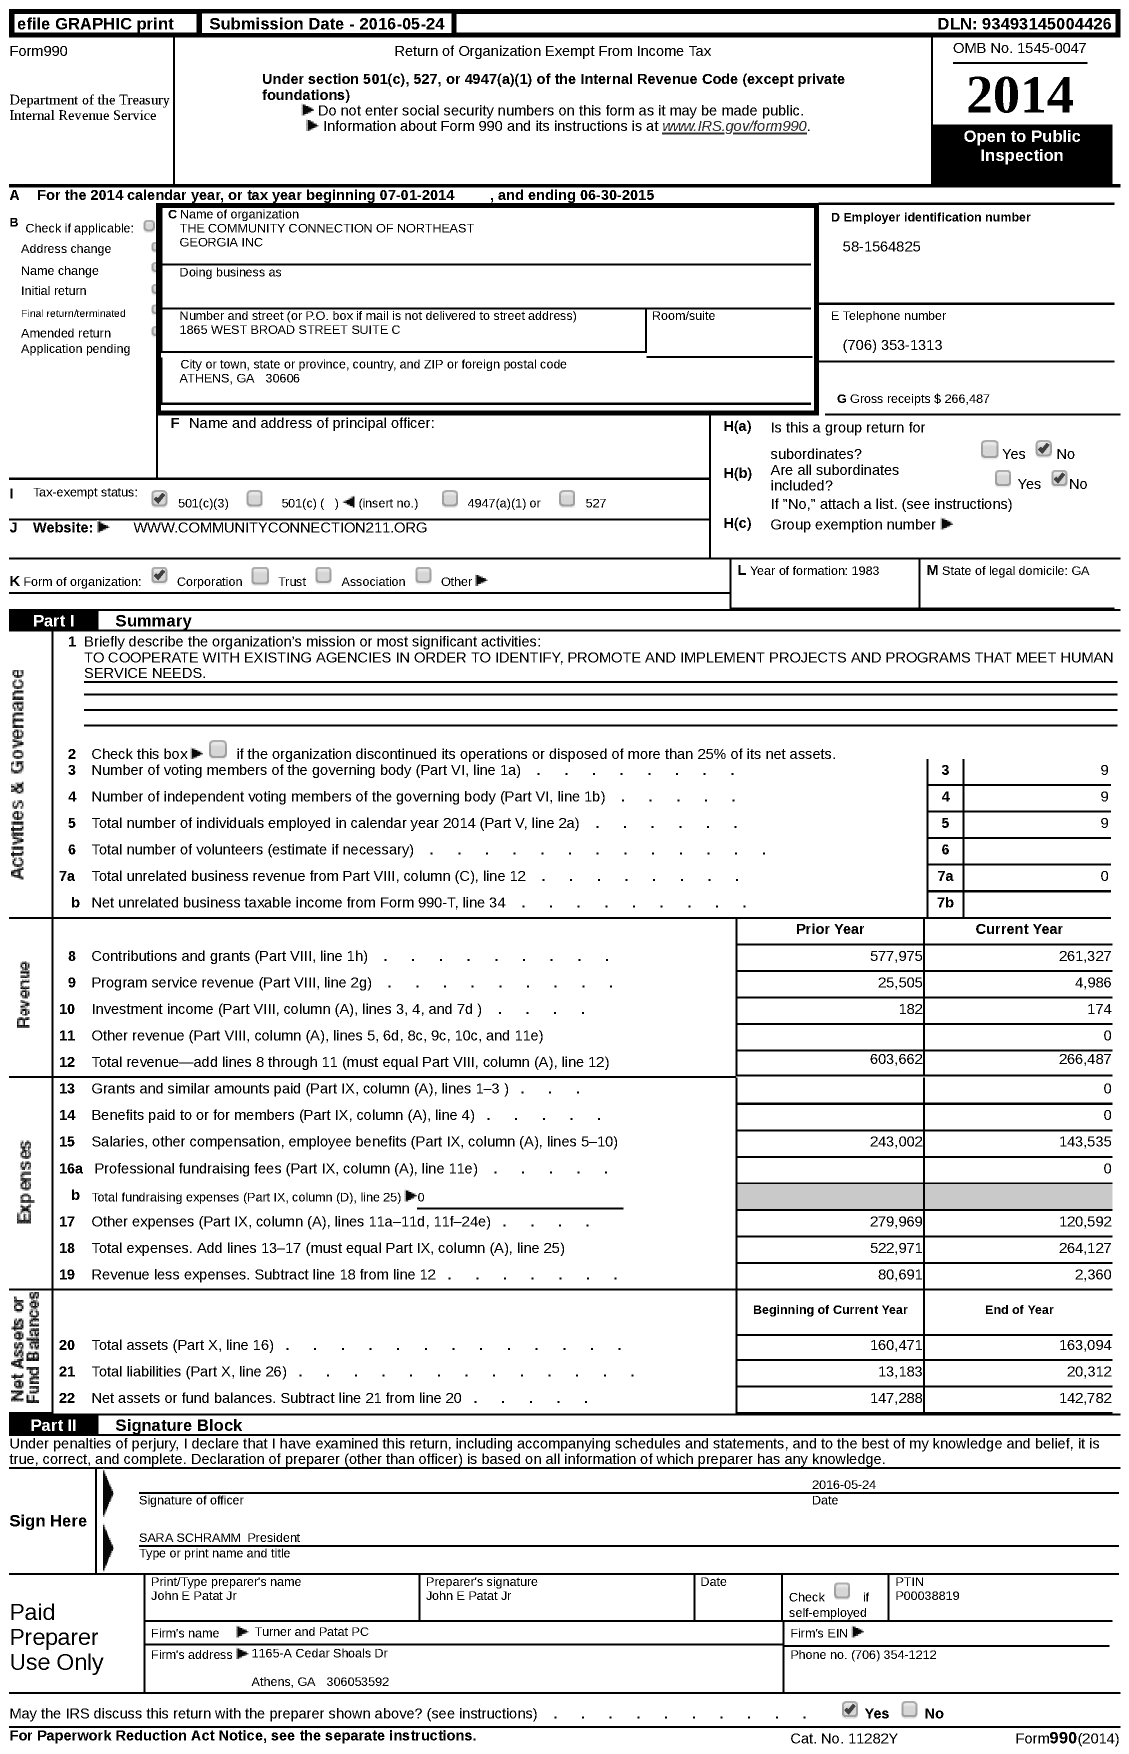 Image of first page of 2014 Form 990 for The Community Connection of Northeast Georgia